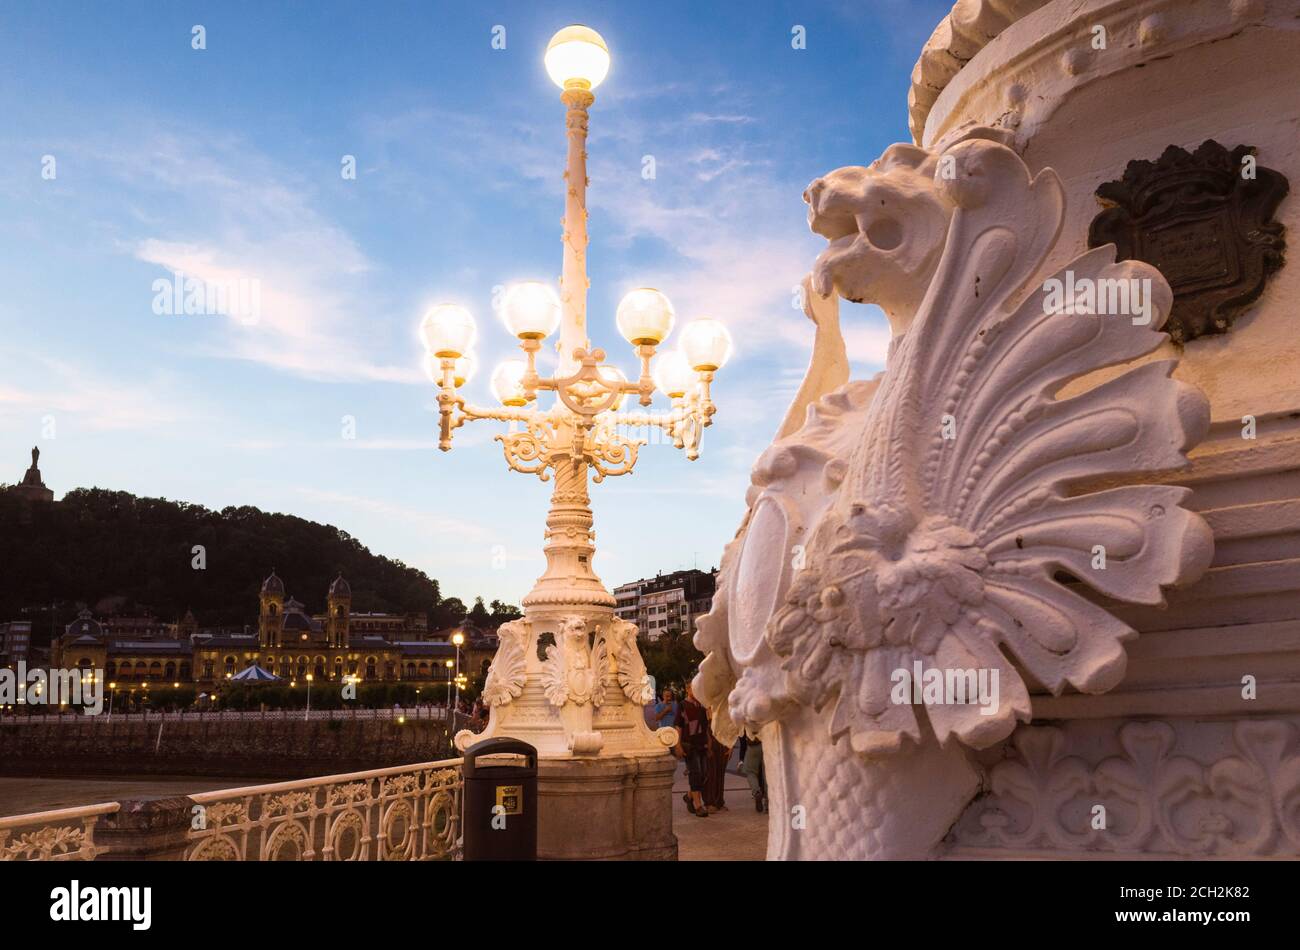 Donostia, Gipuzkoa, Basque Country, Spain - July 12th, 2019 : Close up of ornated street lamps at dusk with incidental people and city hall in backgro Stock Photo